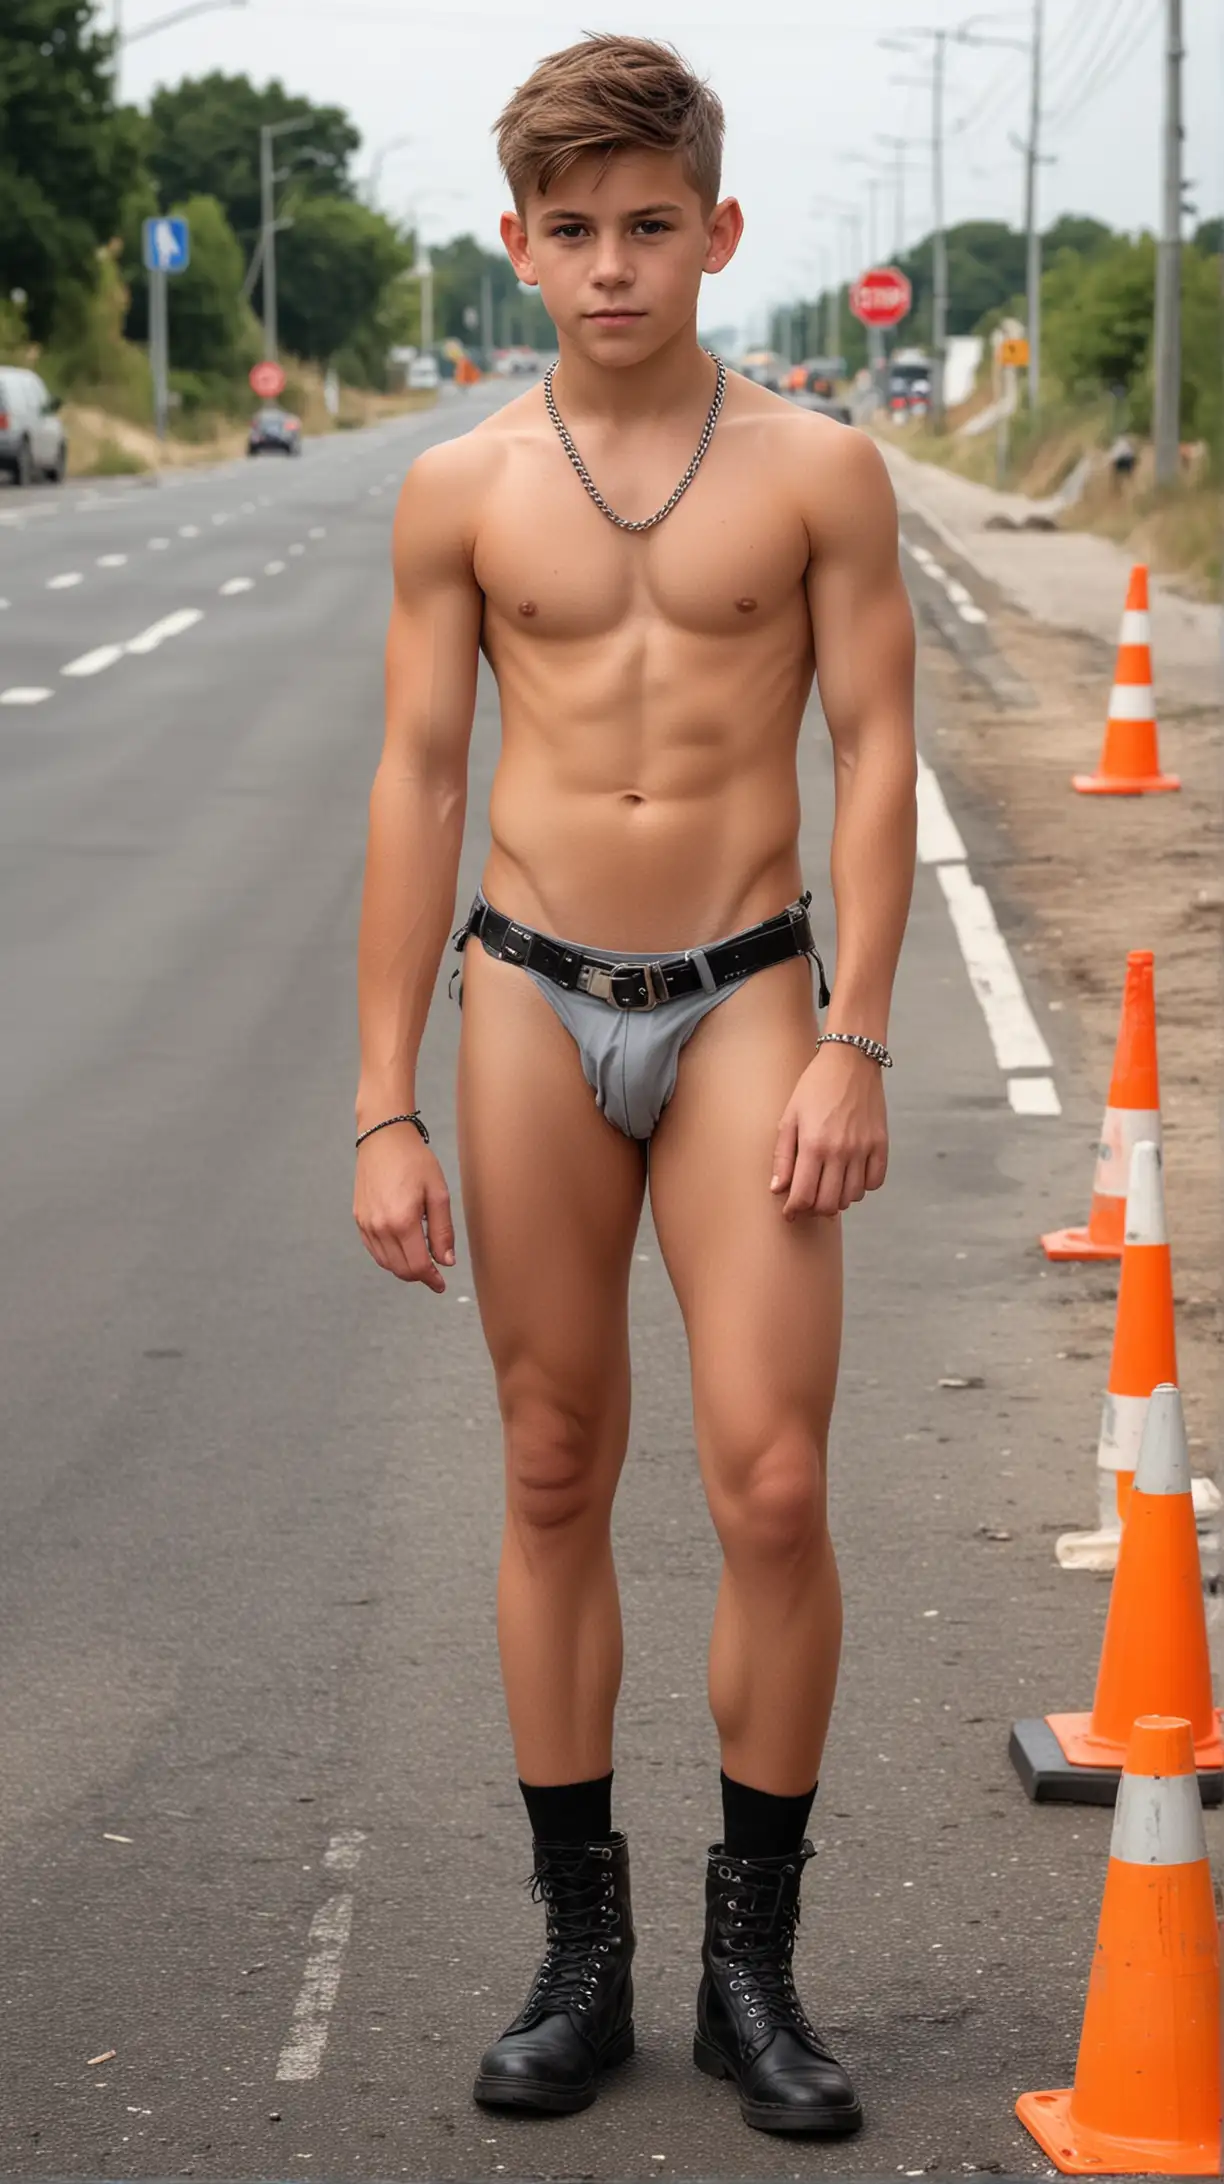 Young Male Model in Roadwork Safety Gear